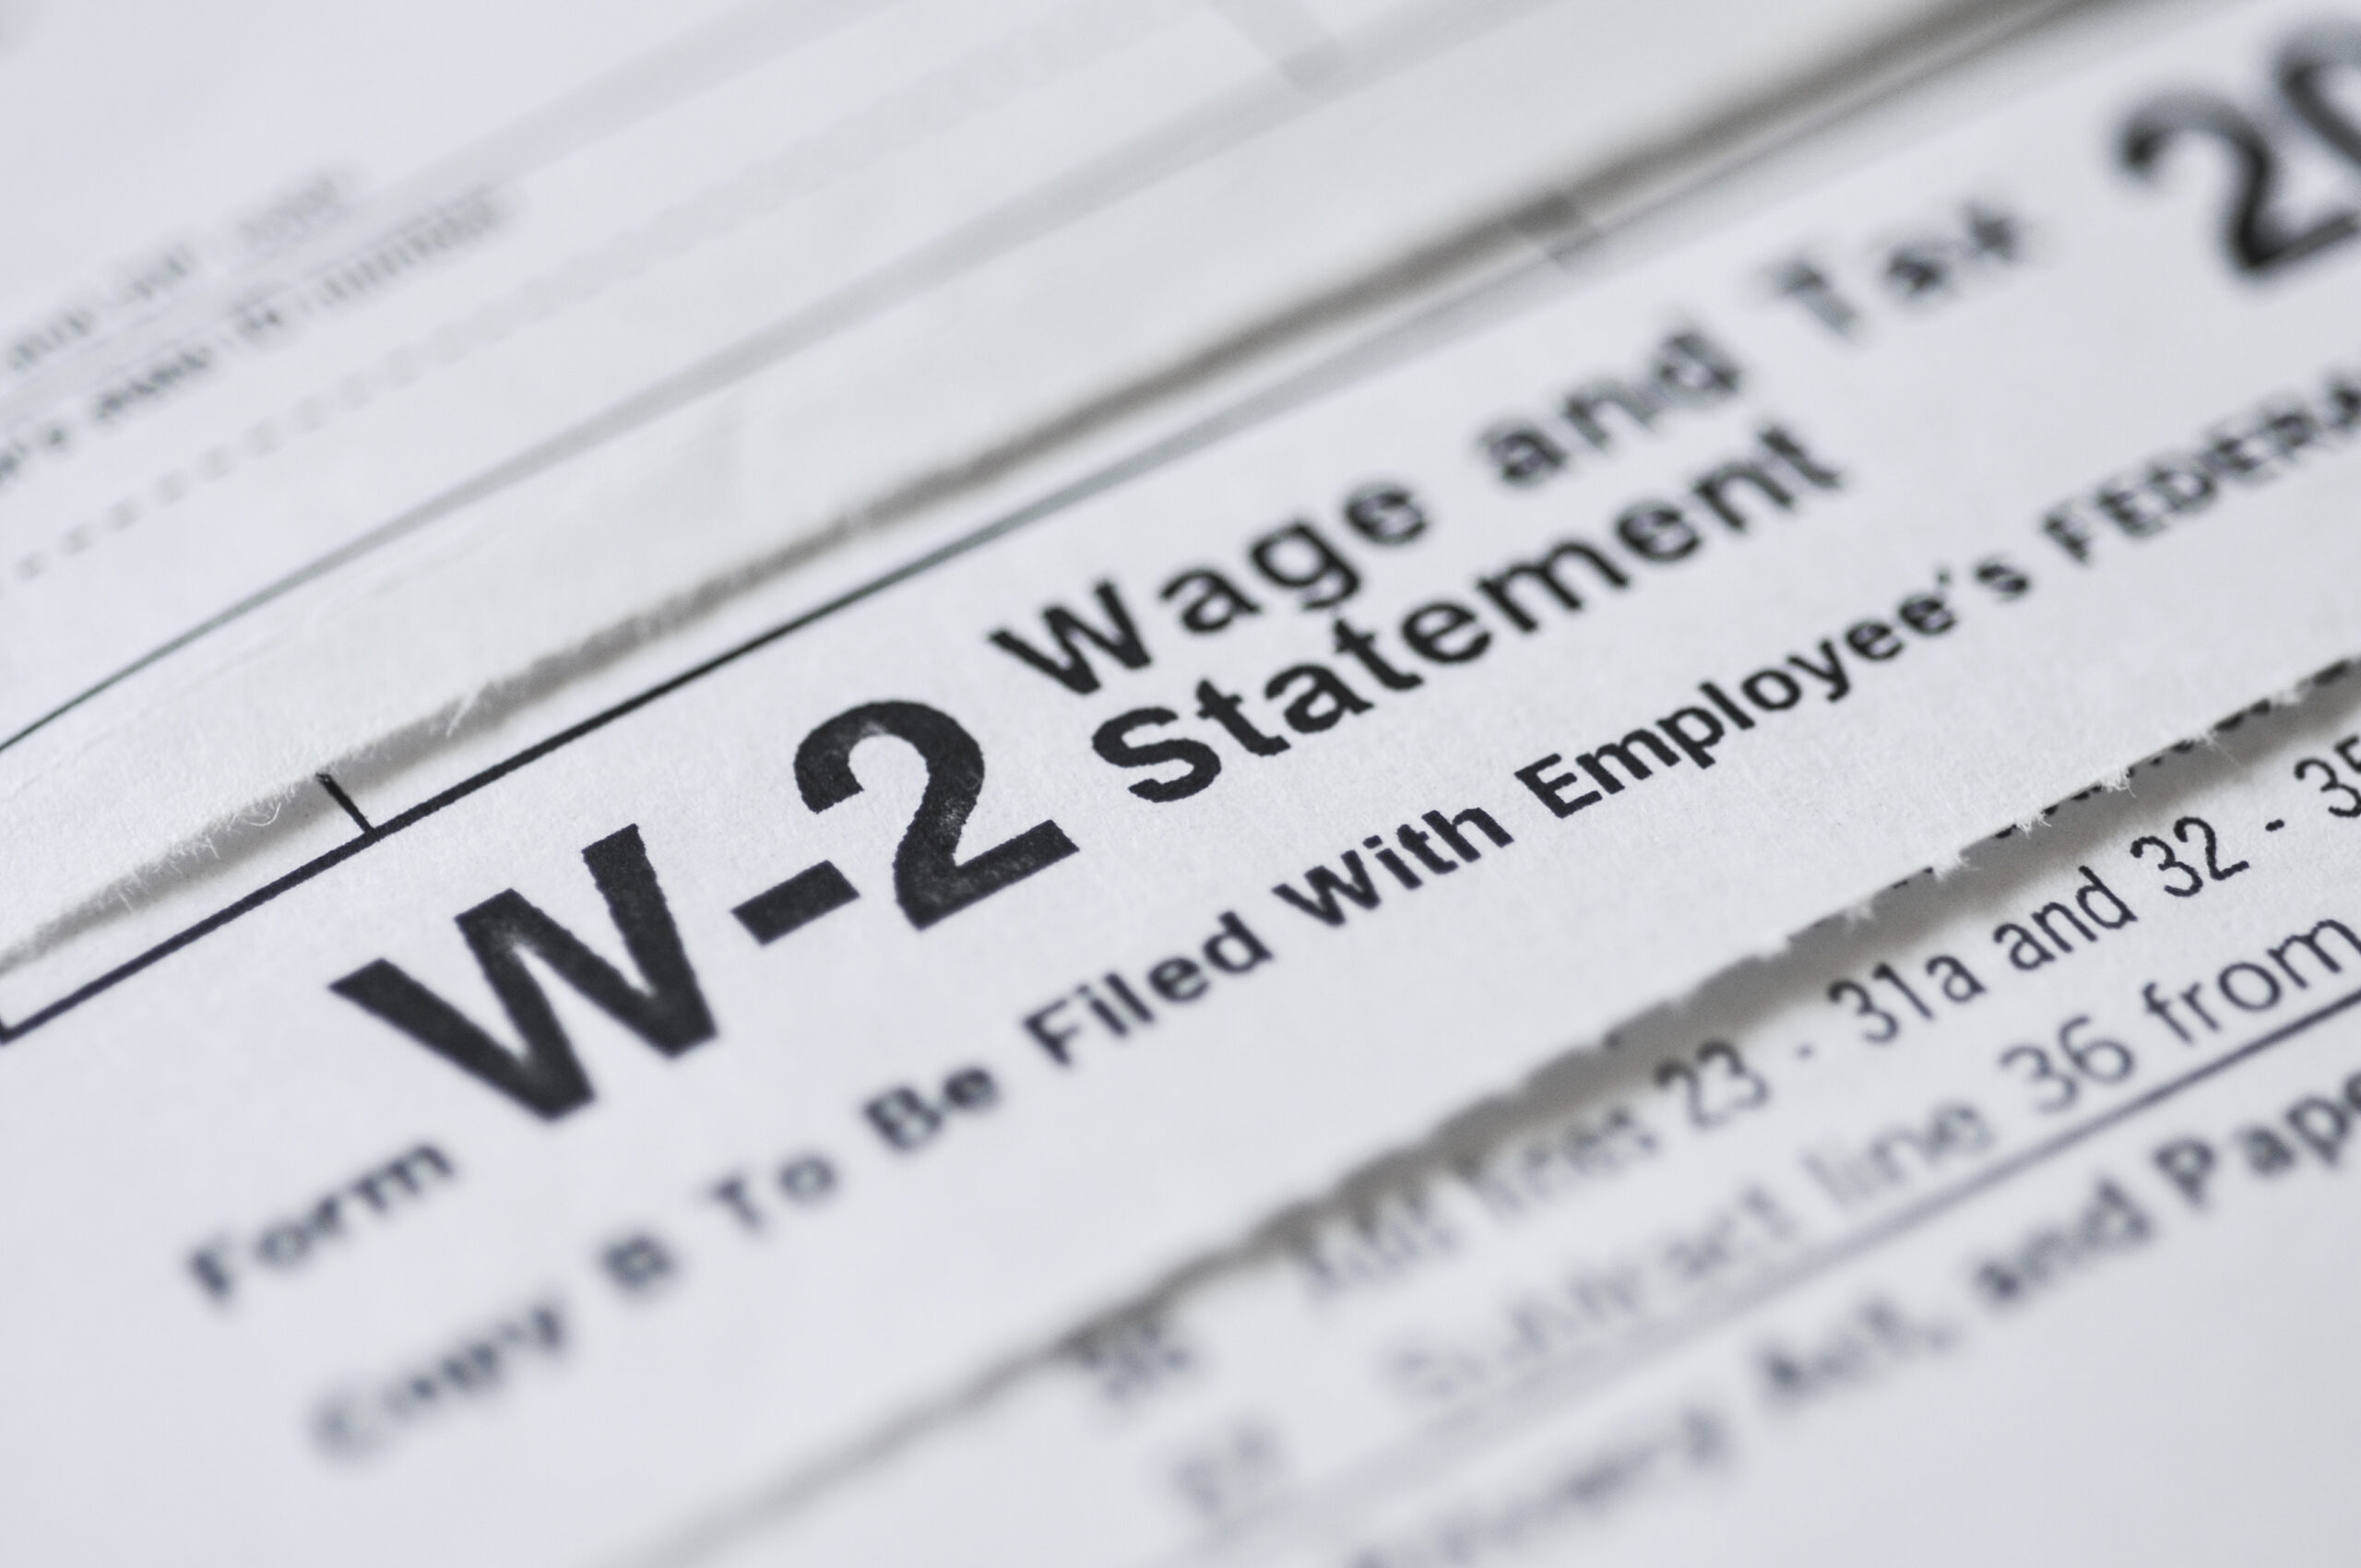 Lost W-2 Tax Form | Money regarding What To Do If You Lost W2 Form